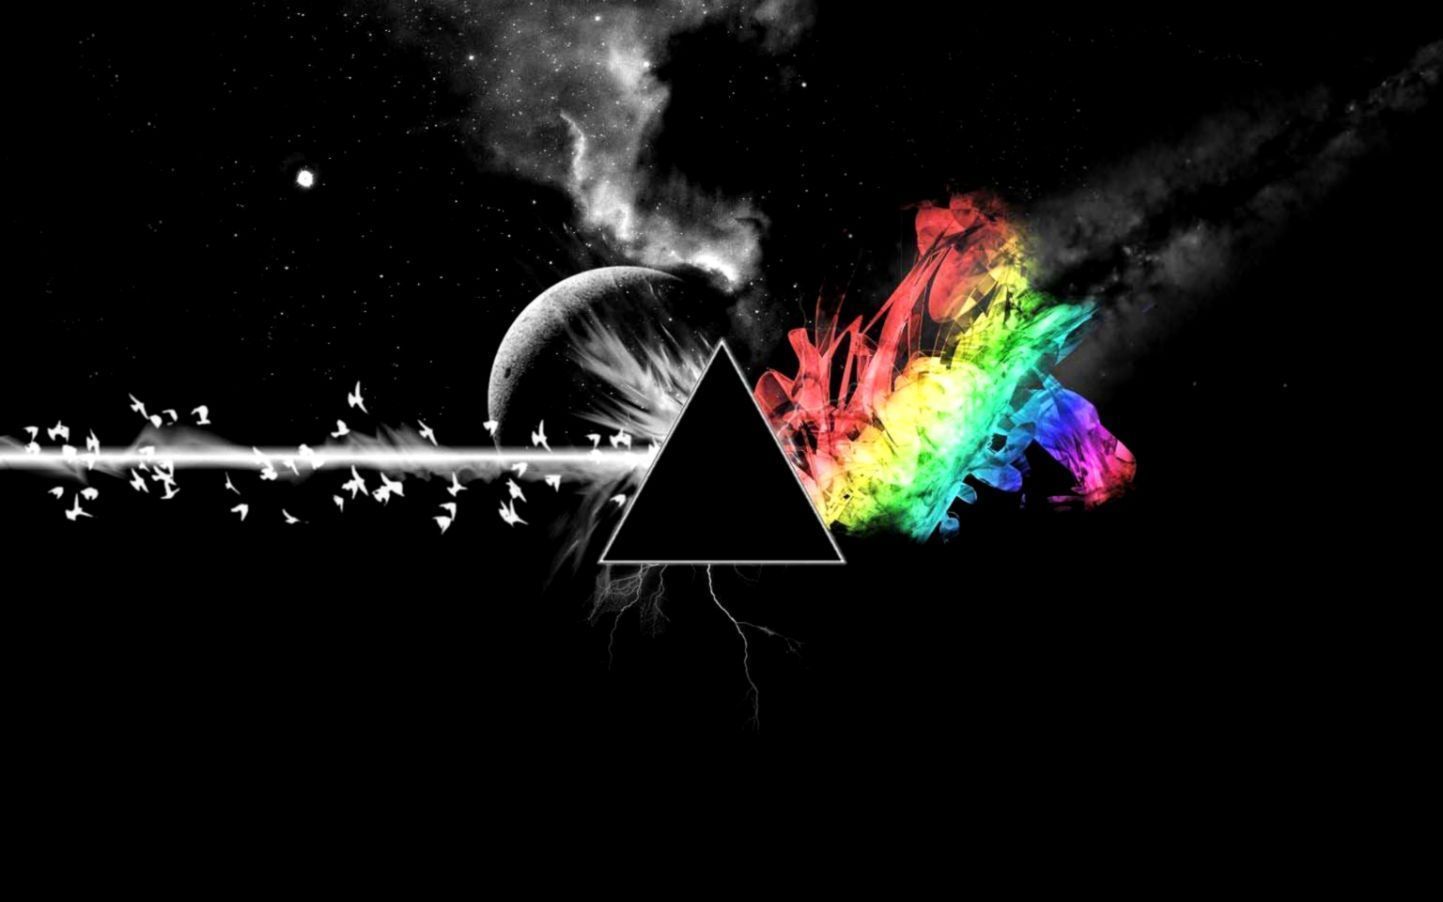 Related image. Pink floyd wallpaper, Moon artwork, Trippy background